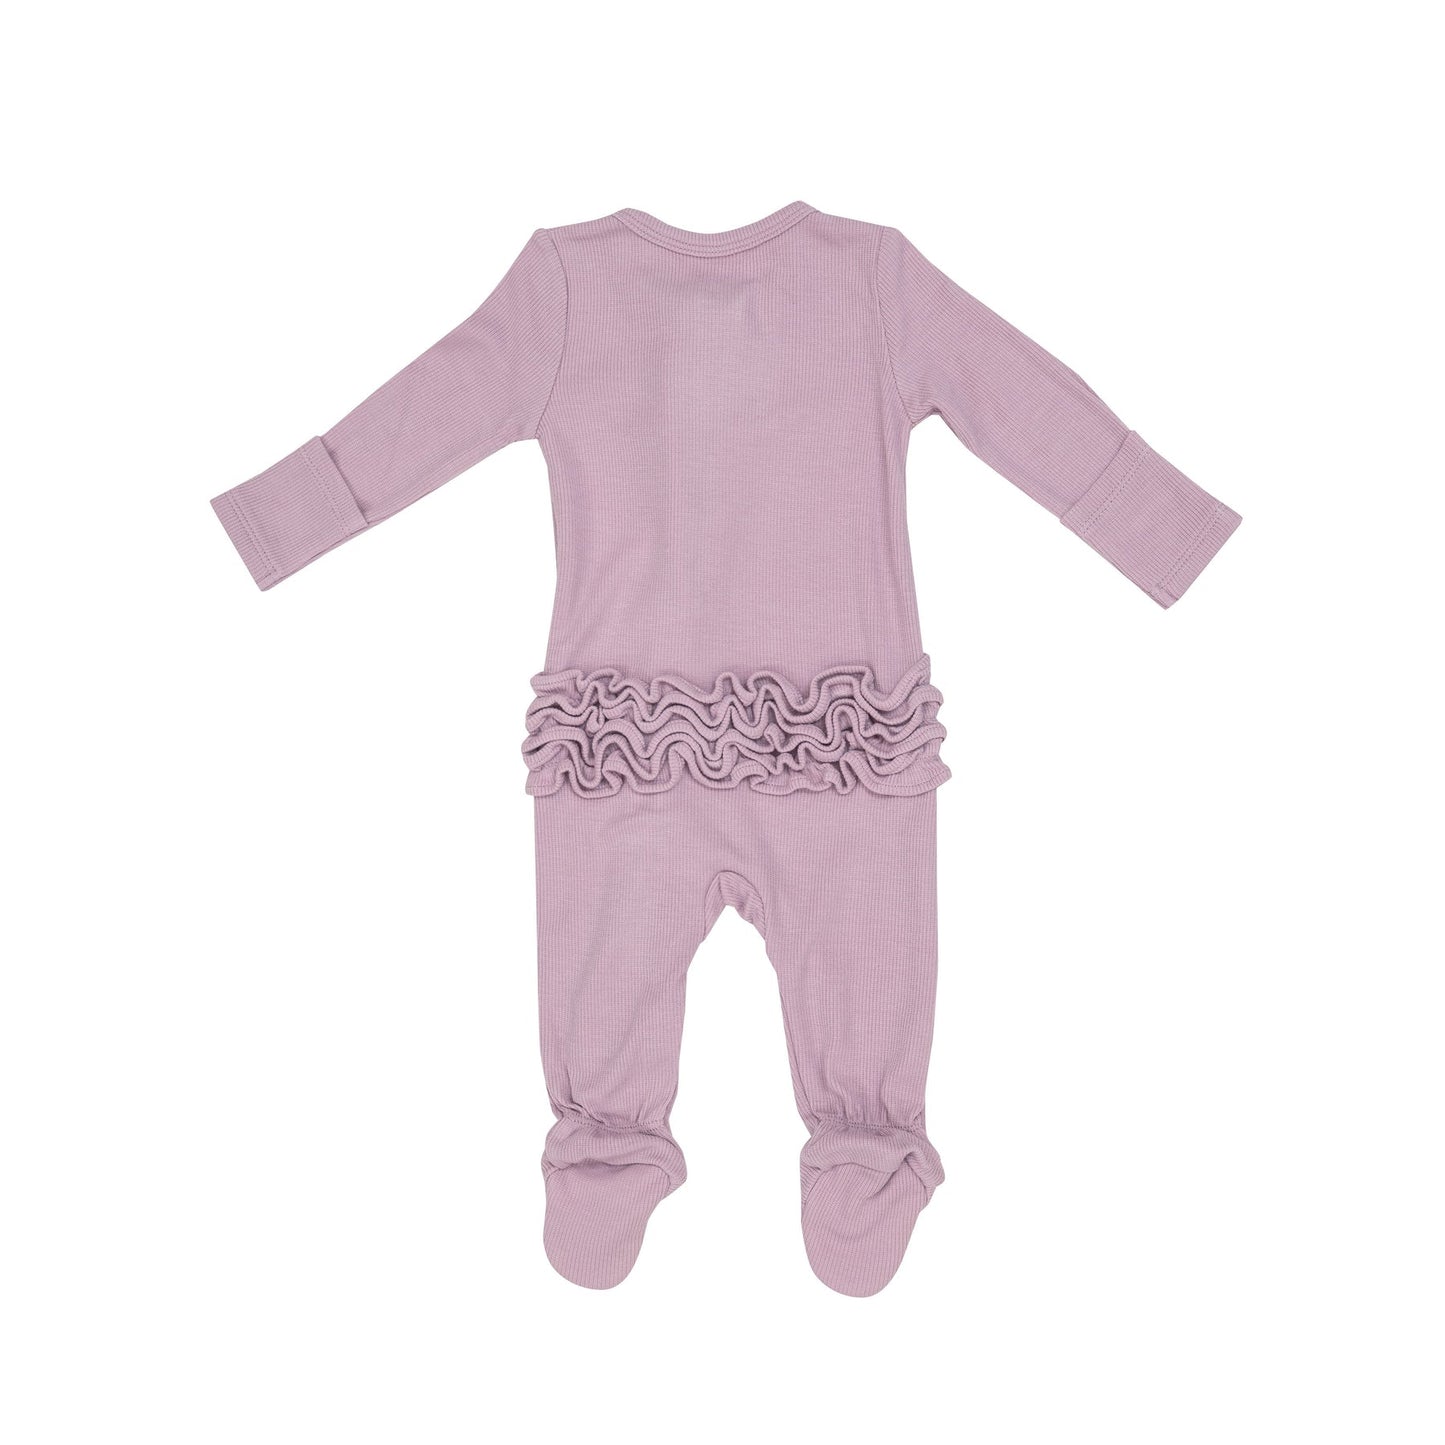 2 Way Ruffle Back Zipper Footie in Rib Dusty Lavender  - Doodlebug's Children's Boutique